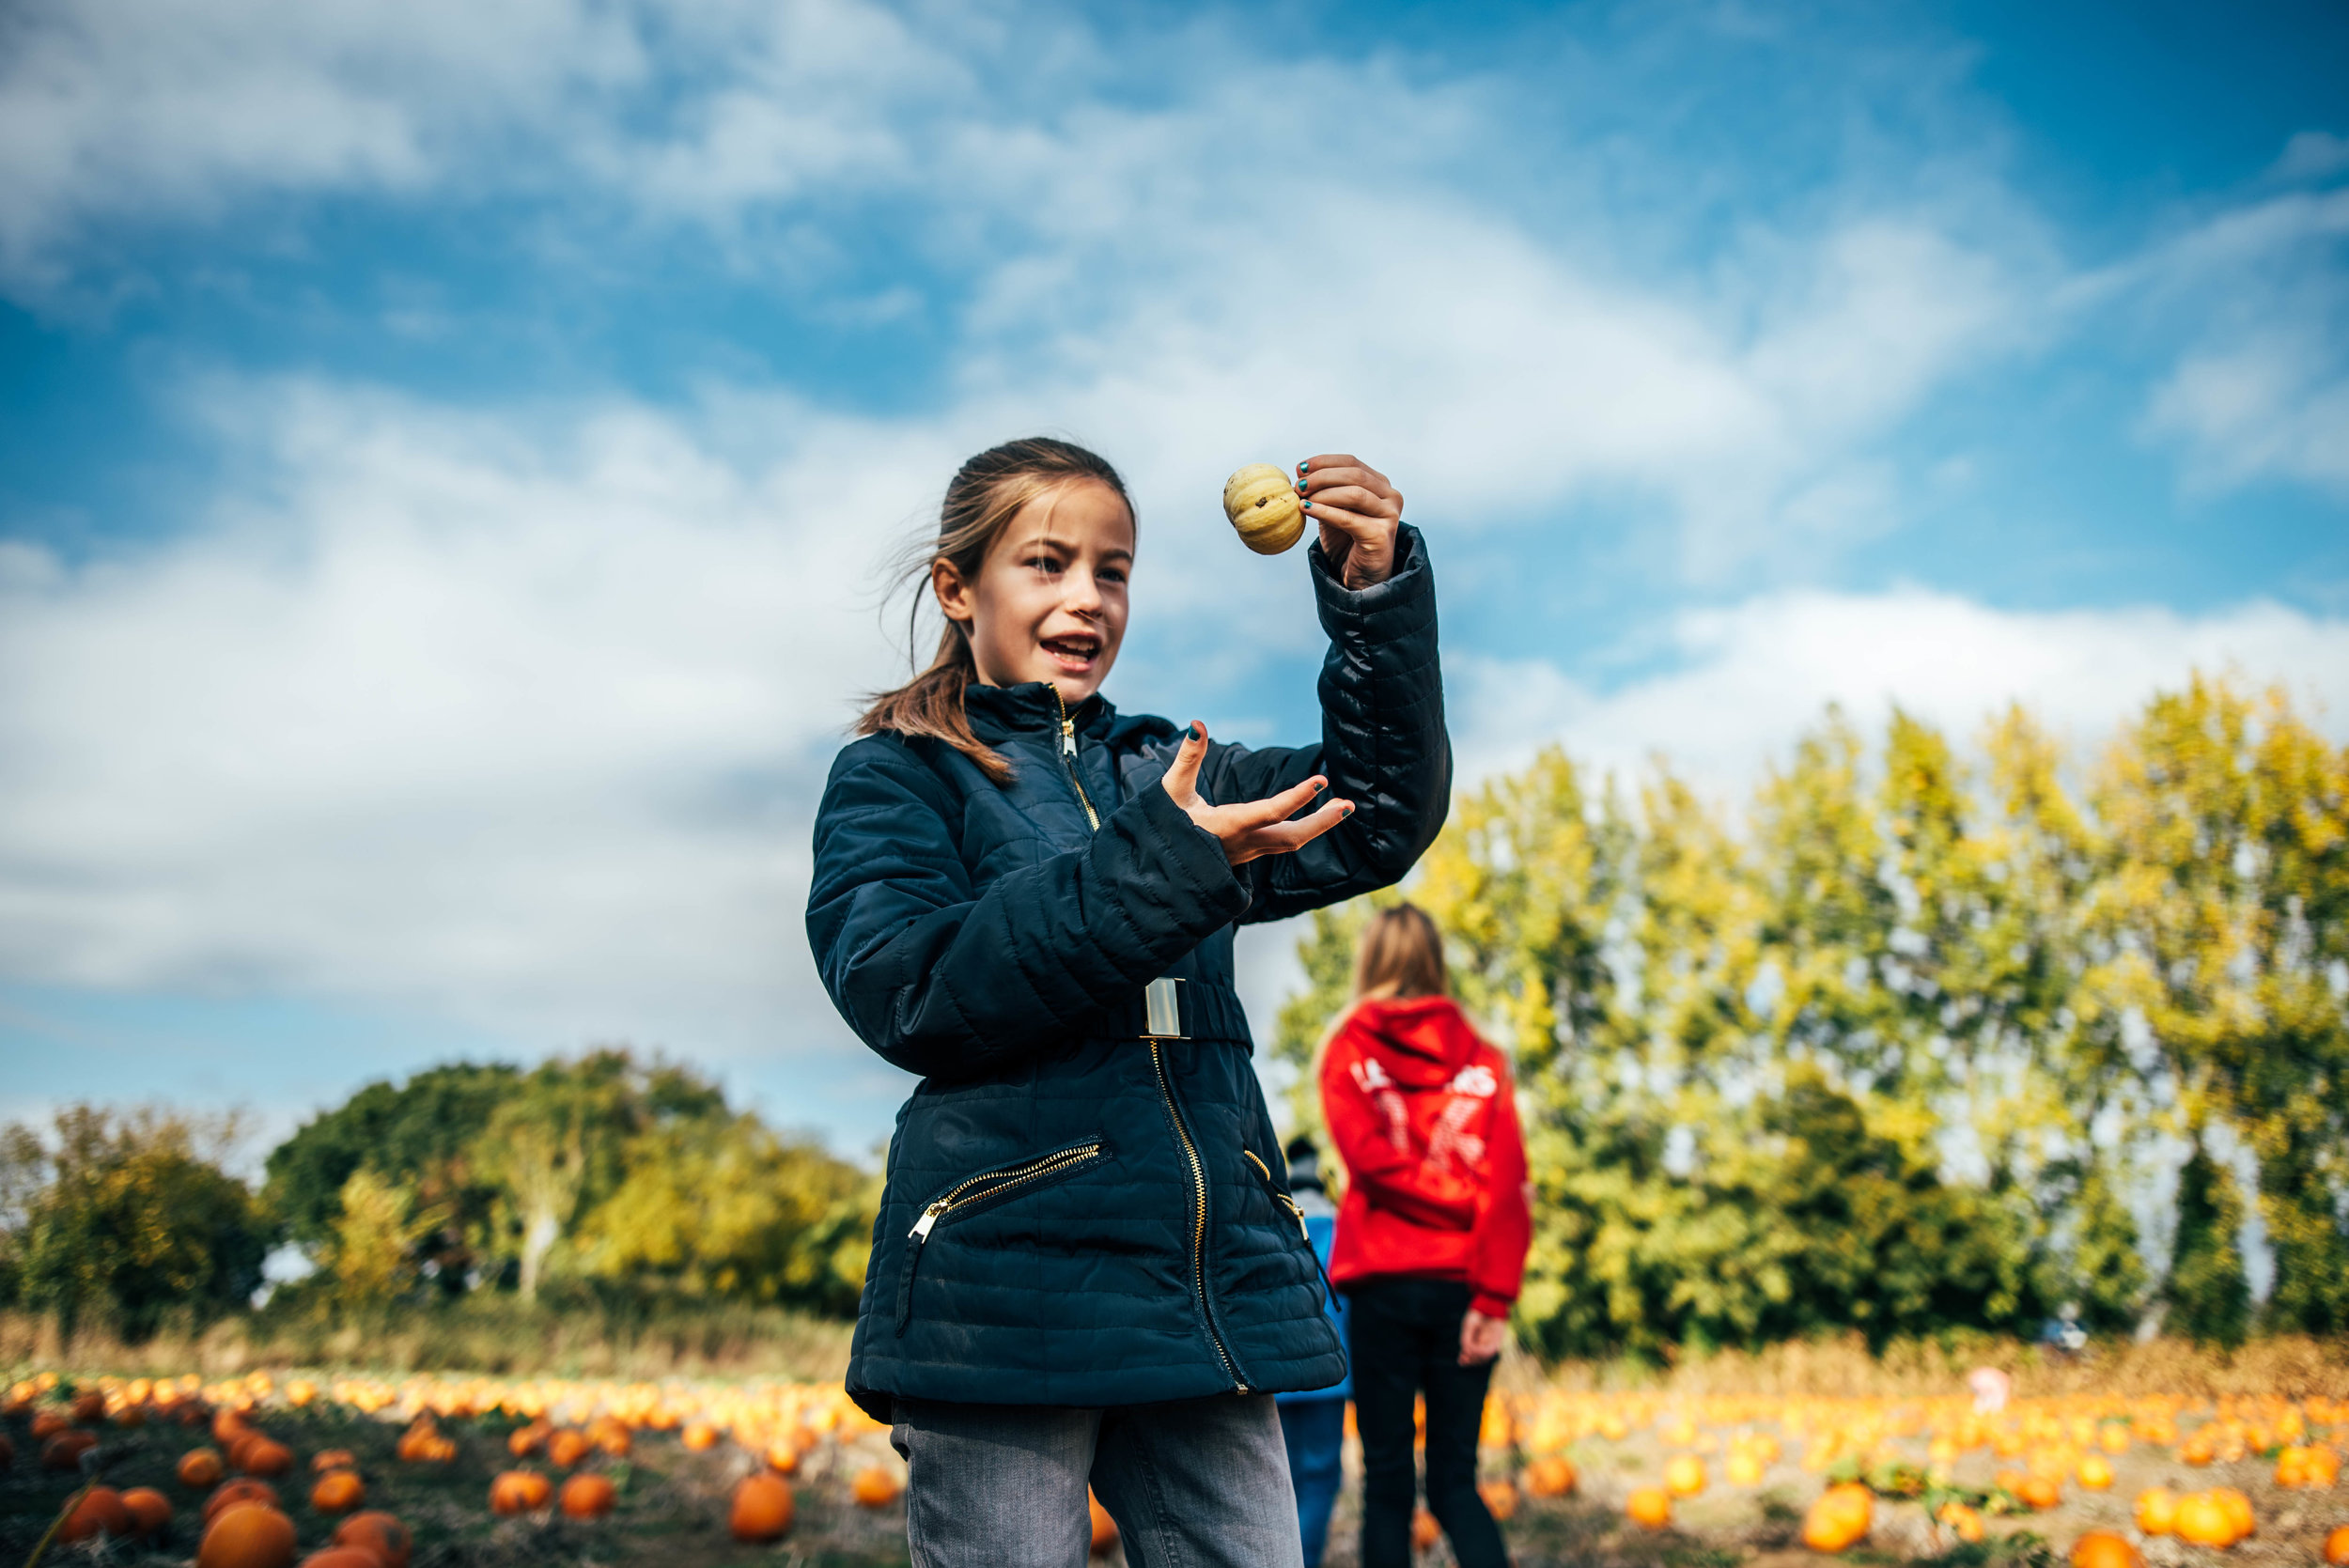 Young girl holds pumpkin up Essex UK Documentary Portrait Photographer